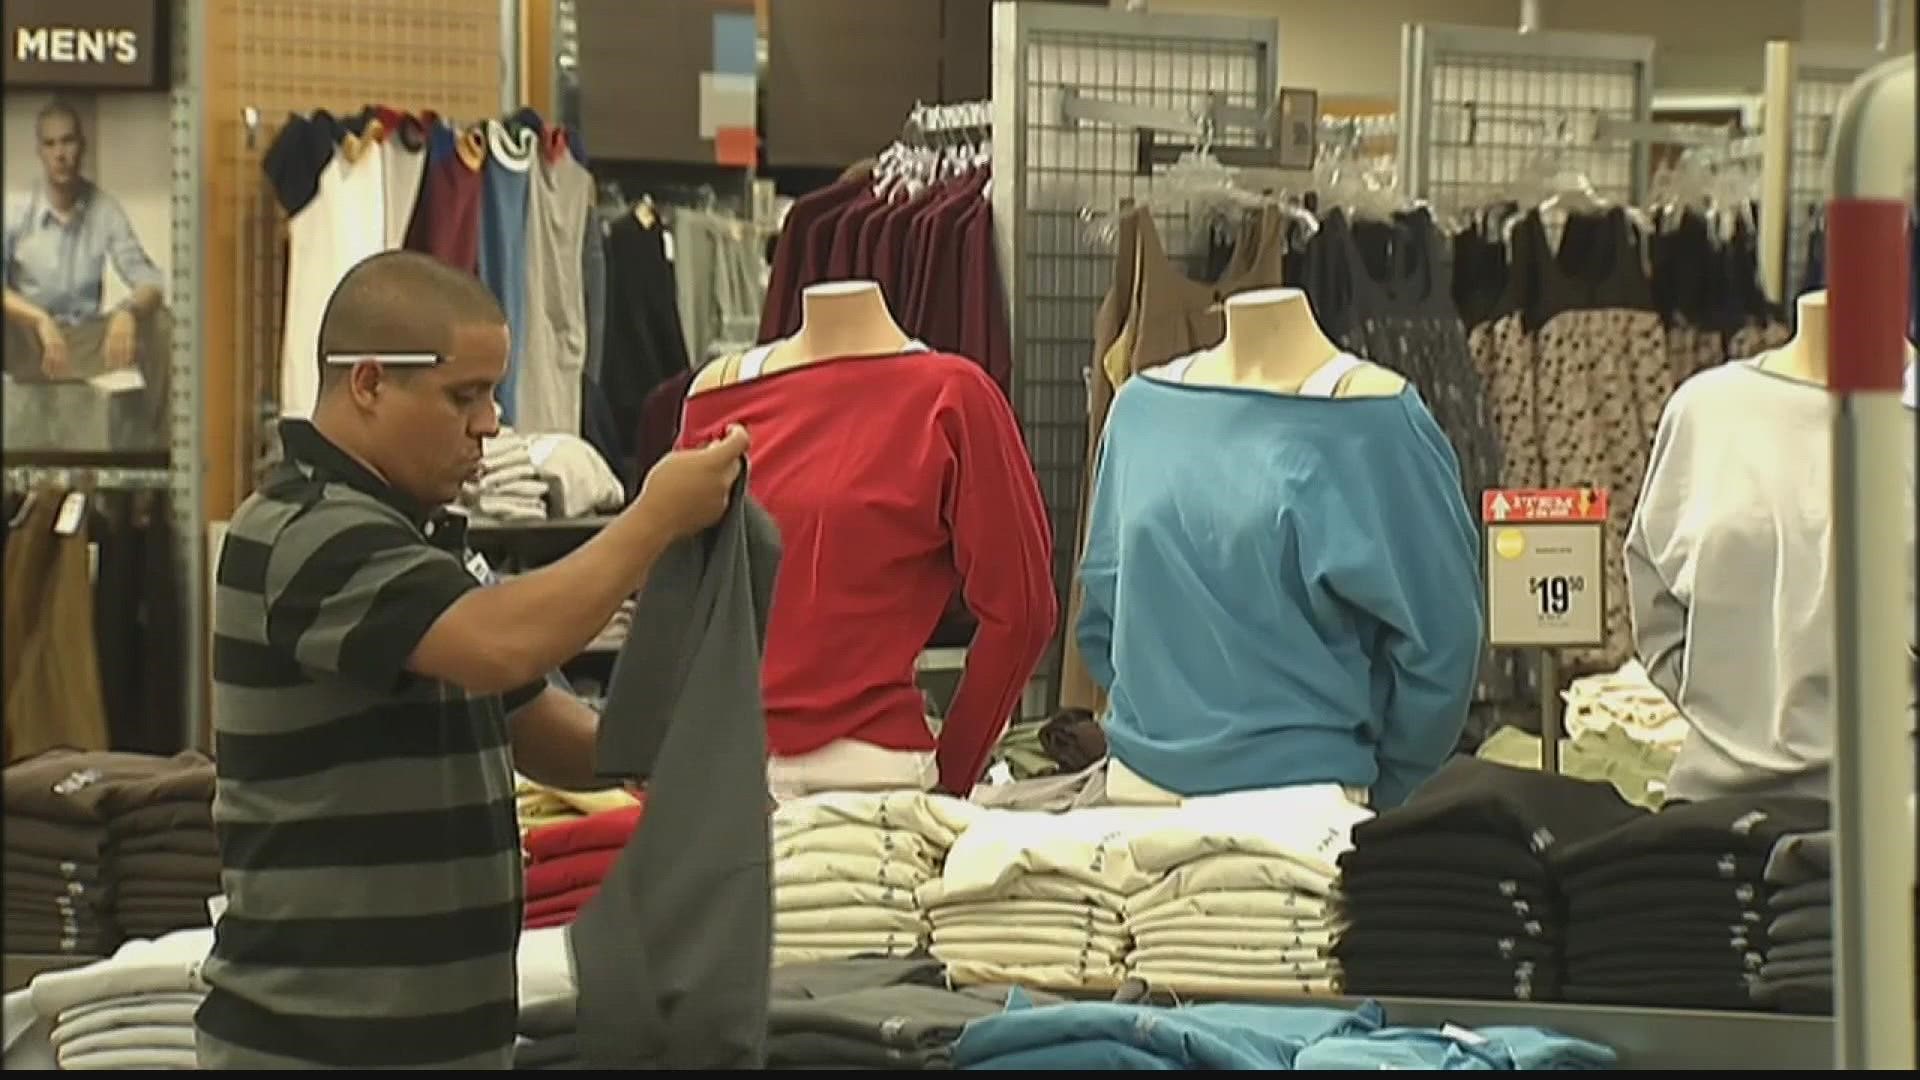 We're a little more than two weeks away from the start of the new school year and economists said you should expect to pay more for Back-to-School clothing.